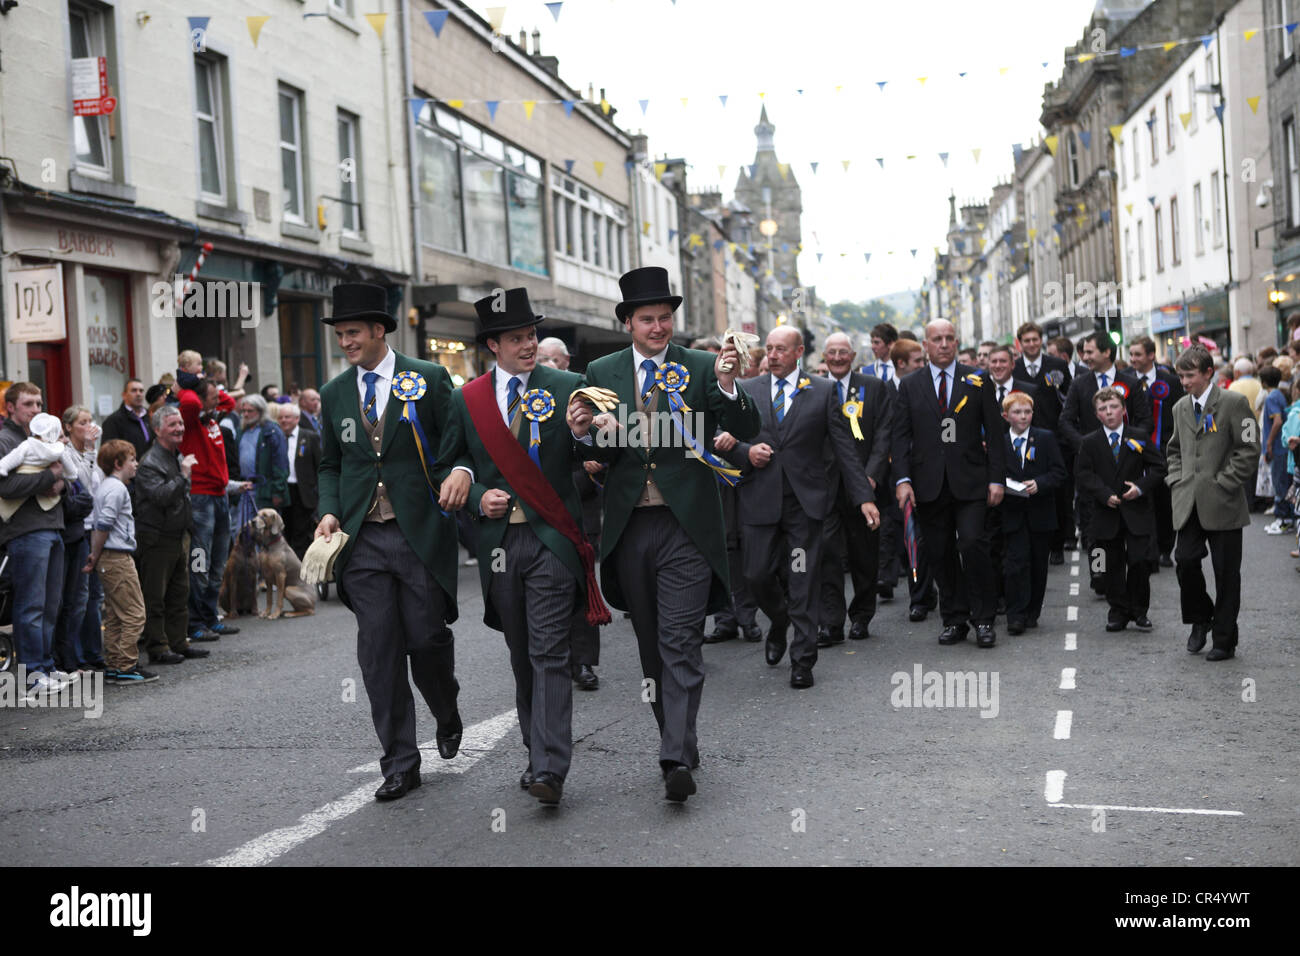 Cornet and supporters parade the High Street during Colour Bussing of Hawick Common-Riding festival in the border town, Scotland Stock Photo